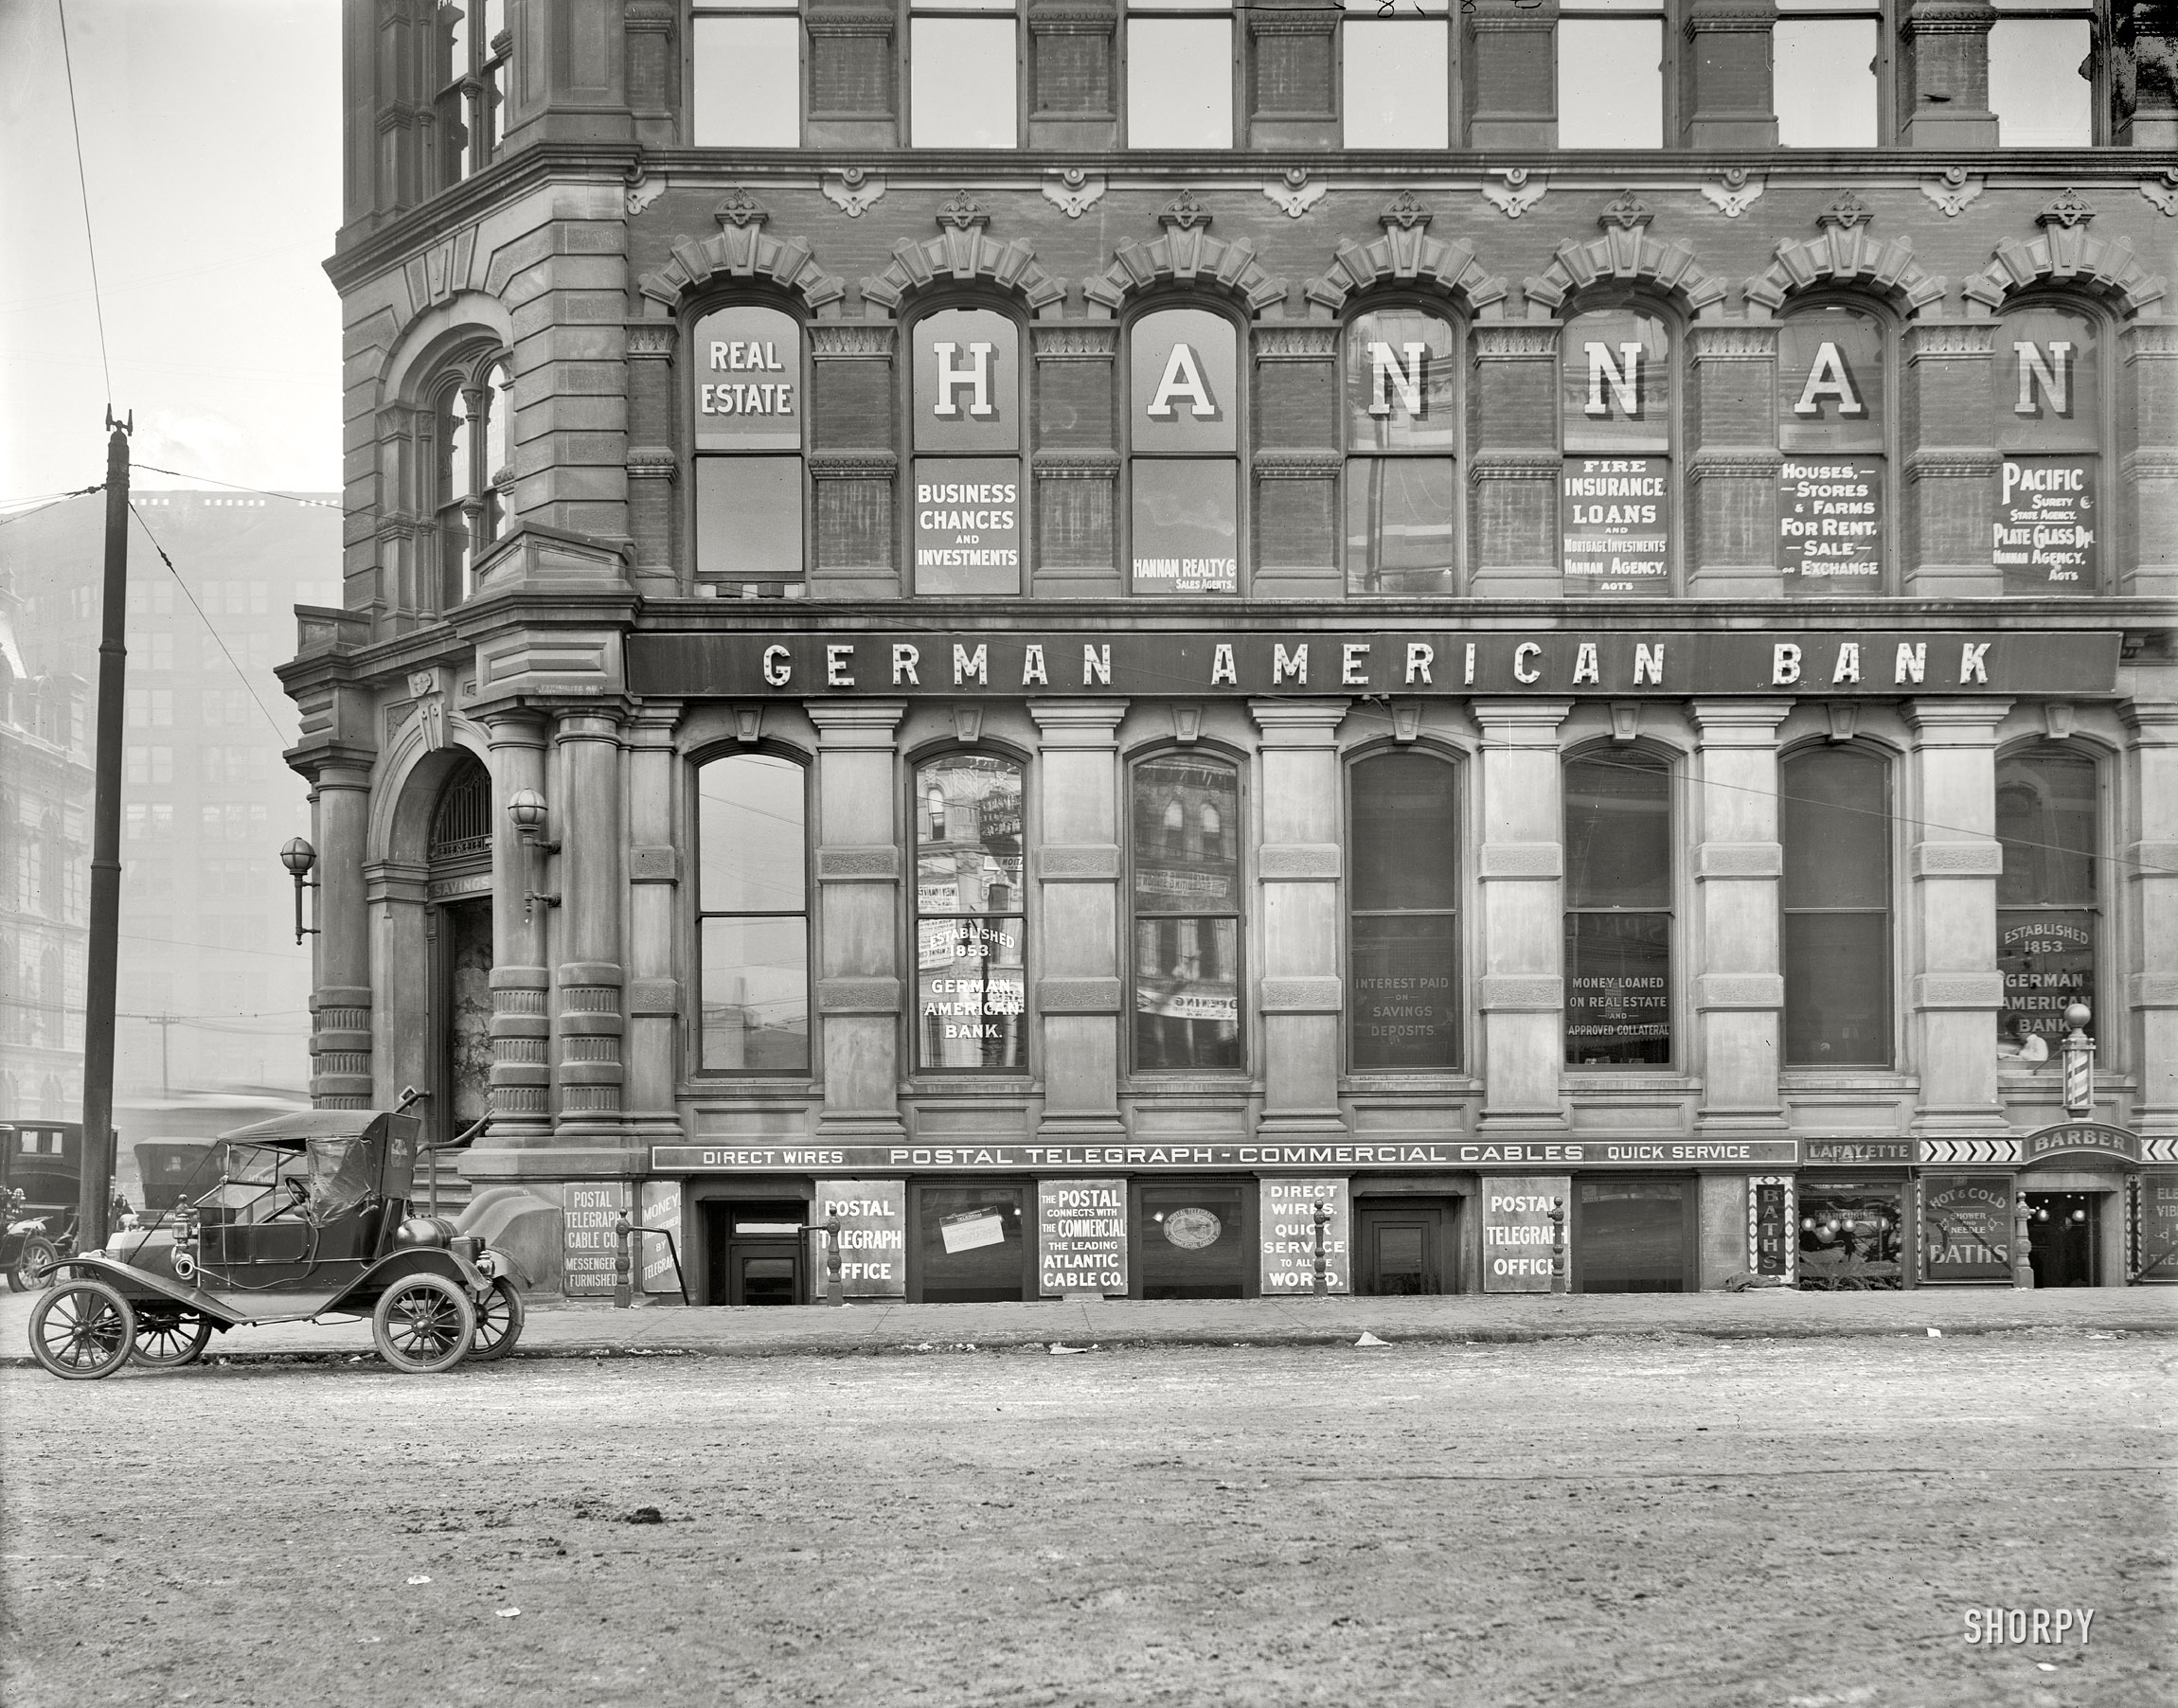 Circa 1911. "Postal Telegraph Cable office below German American Bank. Possibly Detroit, Michigan." Downstairs: Lafayette Barber, offering Shower and Needle Baths, and something to do with electric vibra[...]. View full size. For a closeup of the Model T, click here. For the rest of the building, see this post.